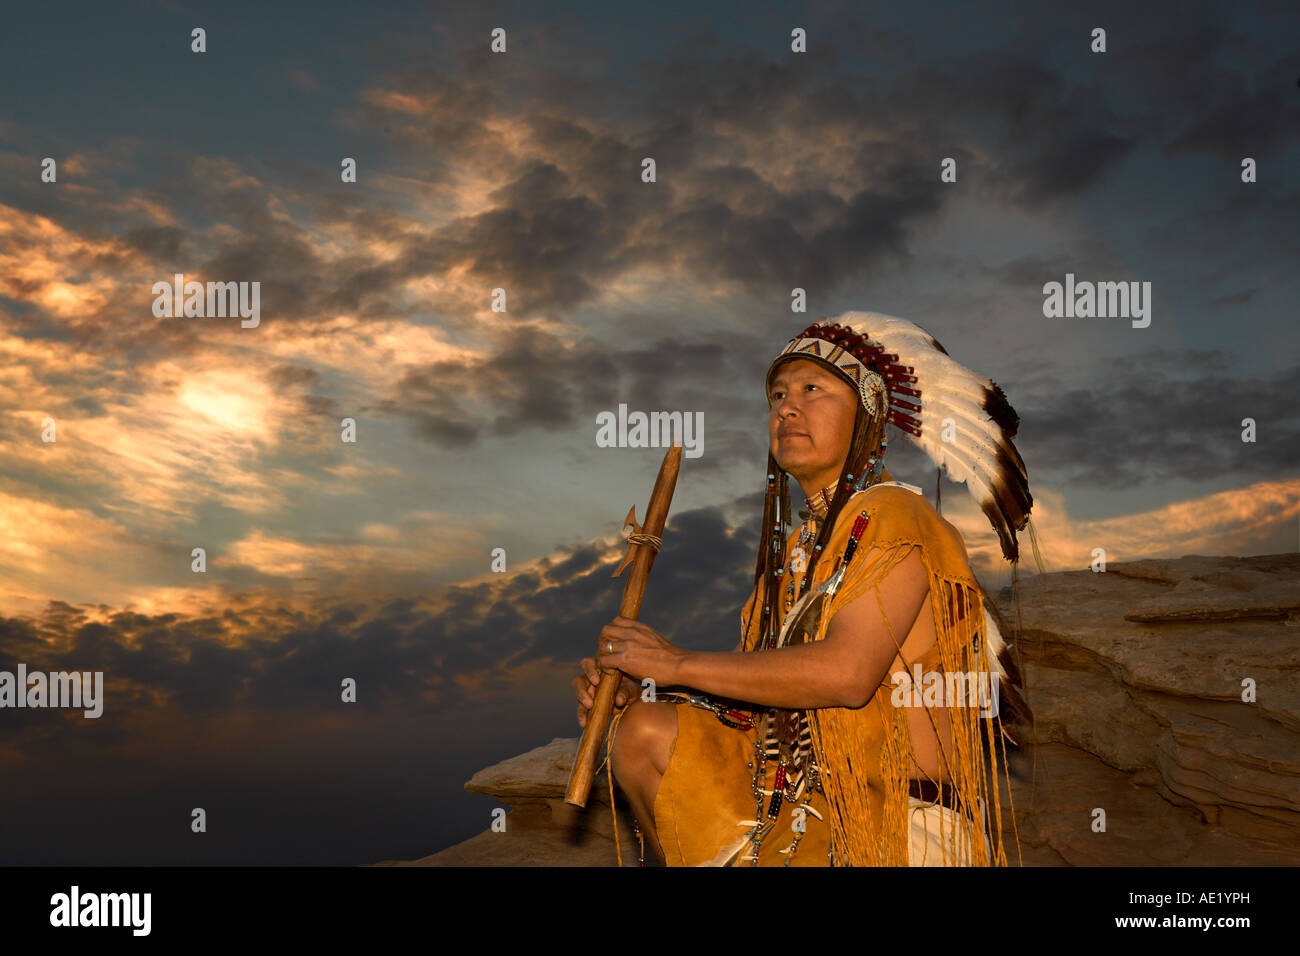 Native American Indian man with cultural outfit uniform headdress feathers design patterns leather band nature sunset sunrise Stock Photo